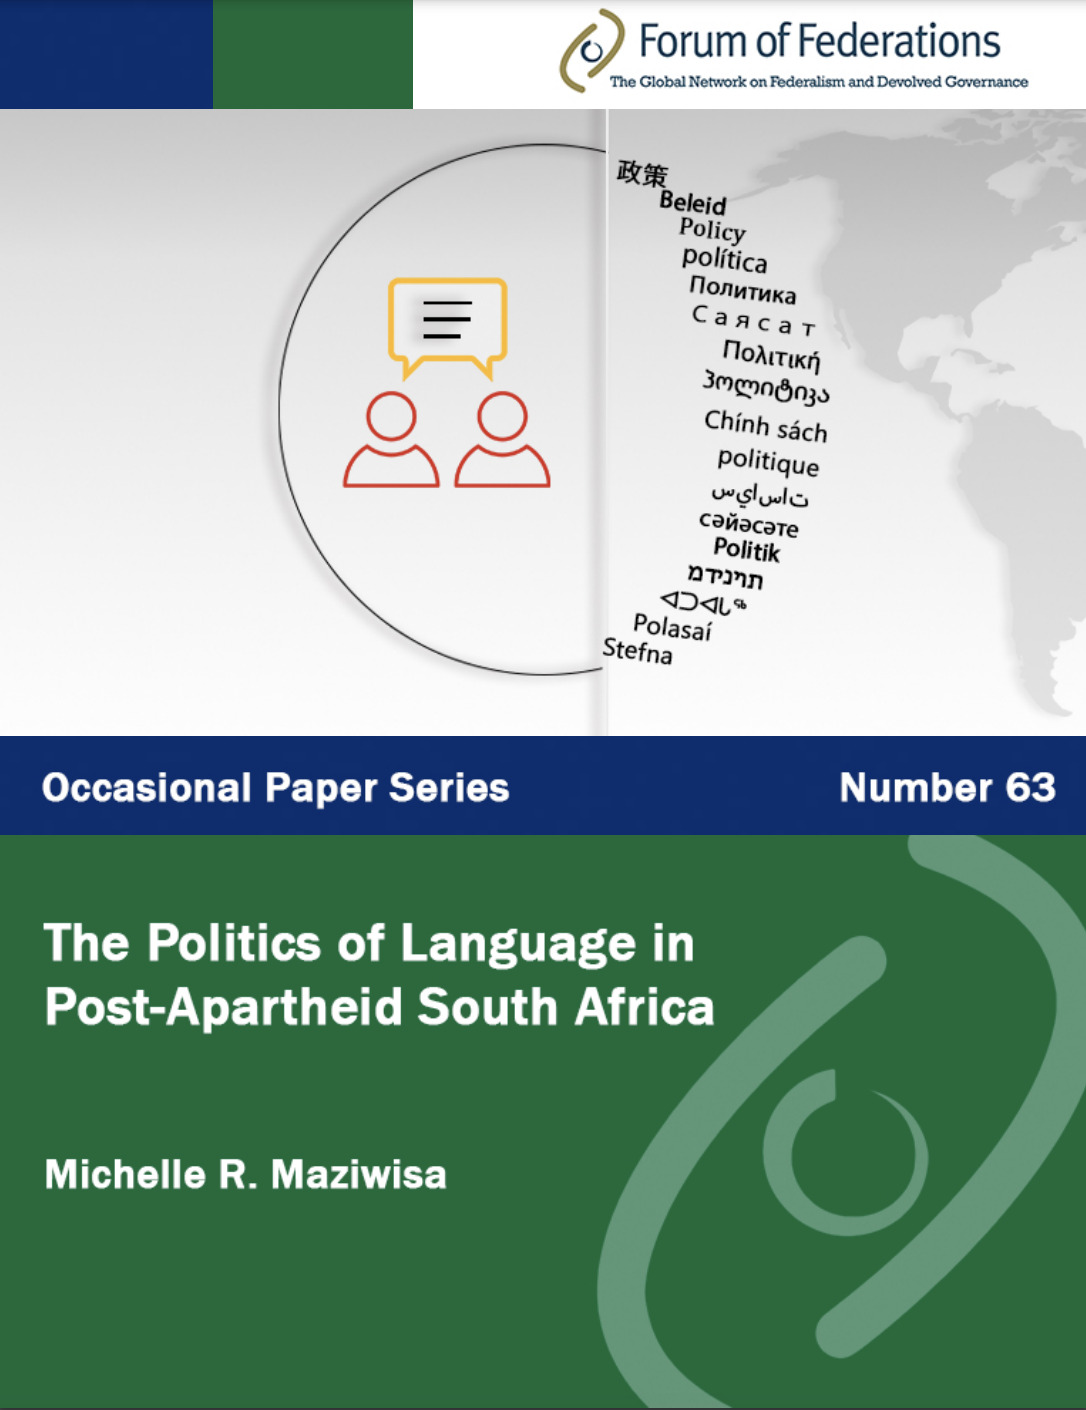 The Politics of Language in Post-Apartheid South Africa